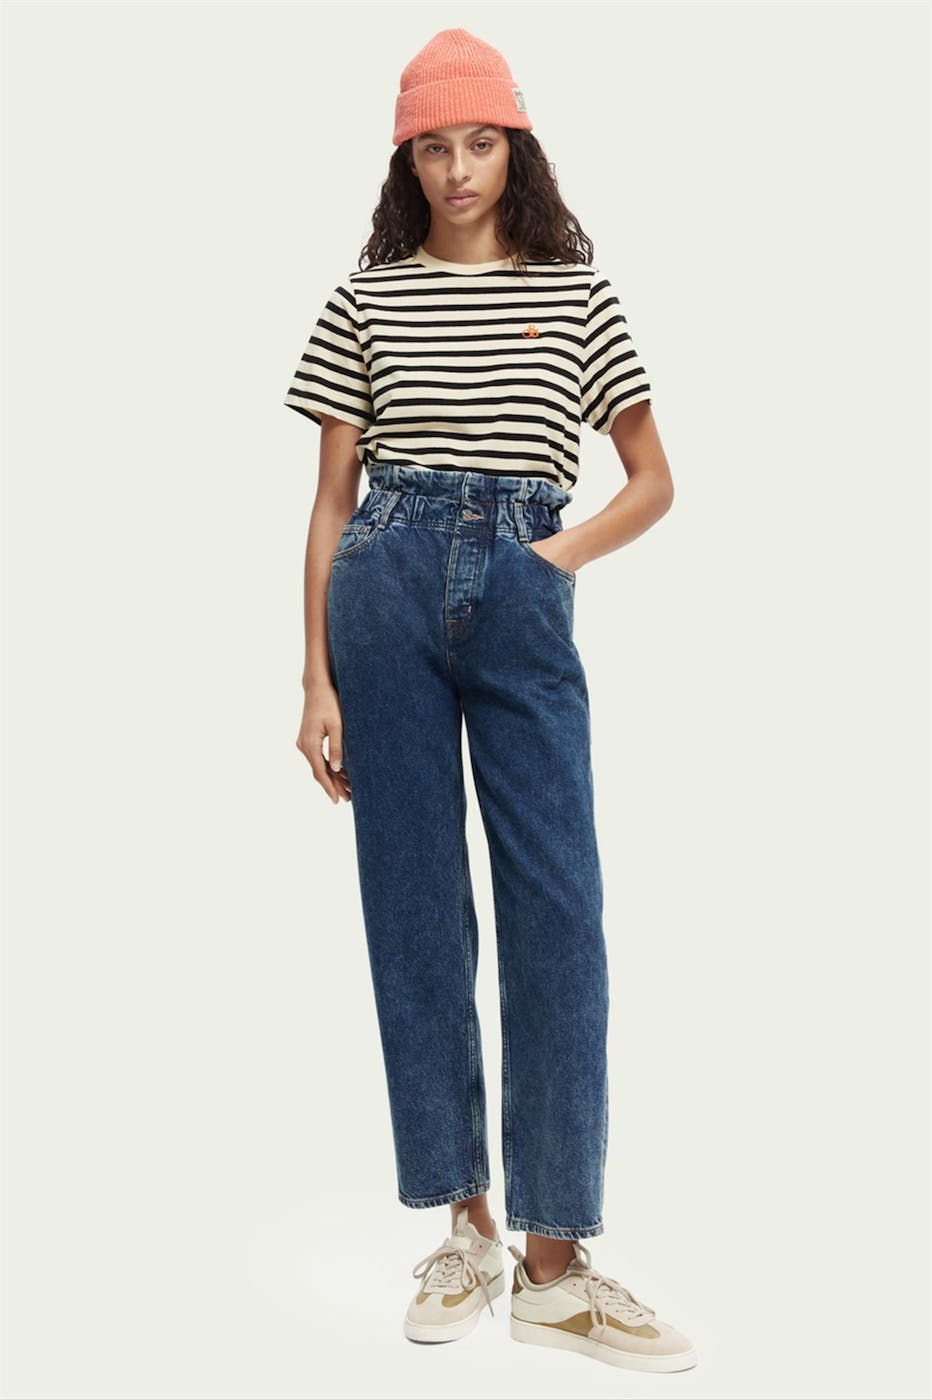 Scotch & Soda - Donkerblauwe High Rise Waisted Straight jeans